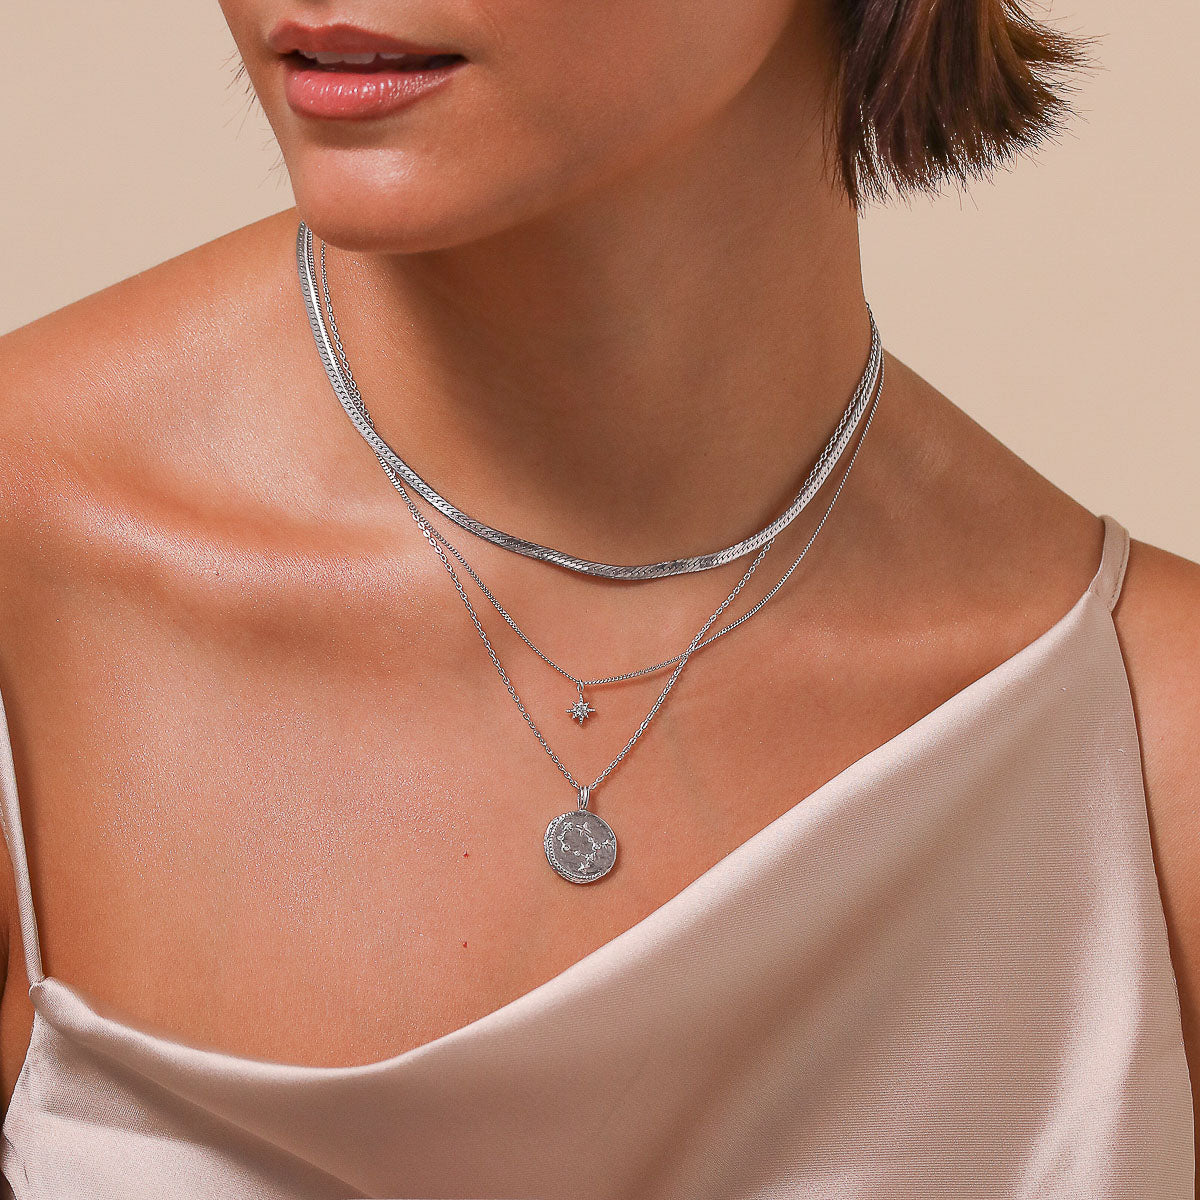 Gemini Zodiac Pendant Necklace in Silver worn layered with necklaces